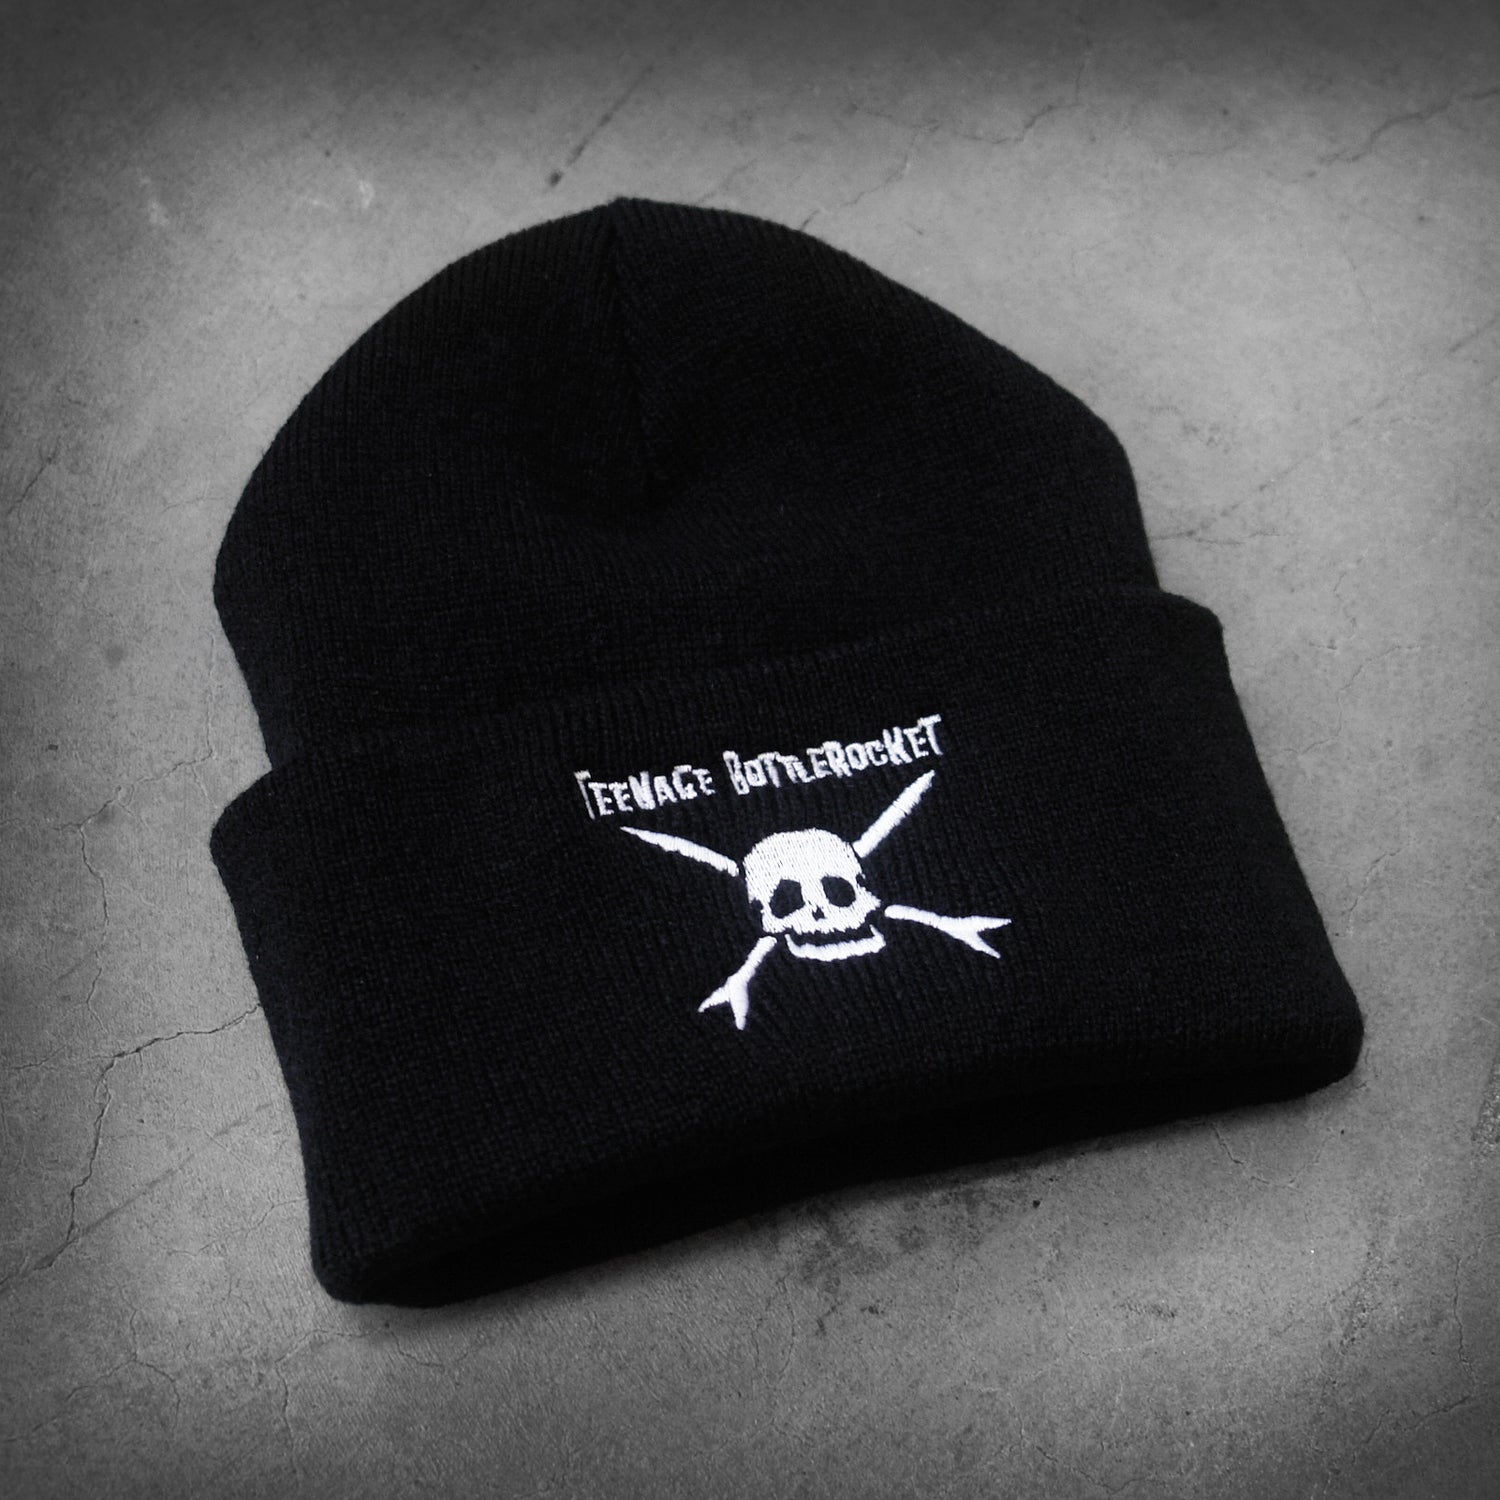 image of a black winter beanie laid flat on a concrete floor. beanie has white embroidery on the front cuff of a skull and teenage bottlerocket above it